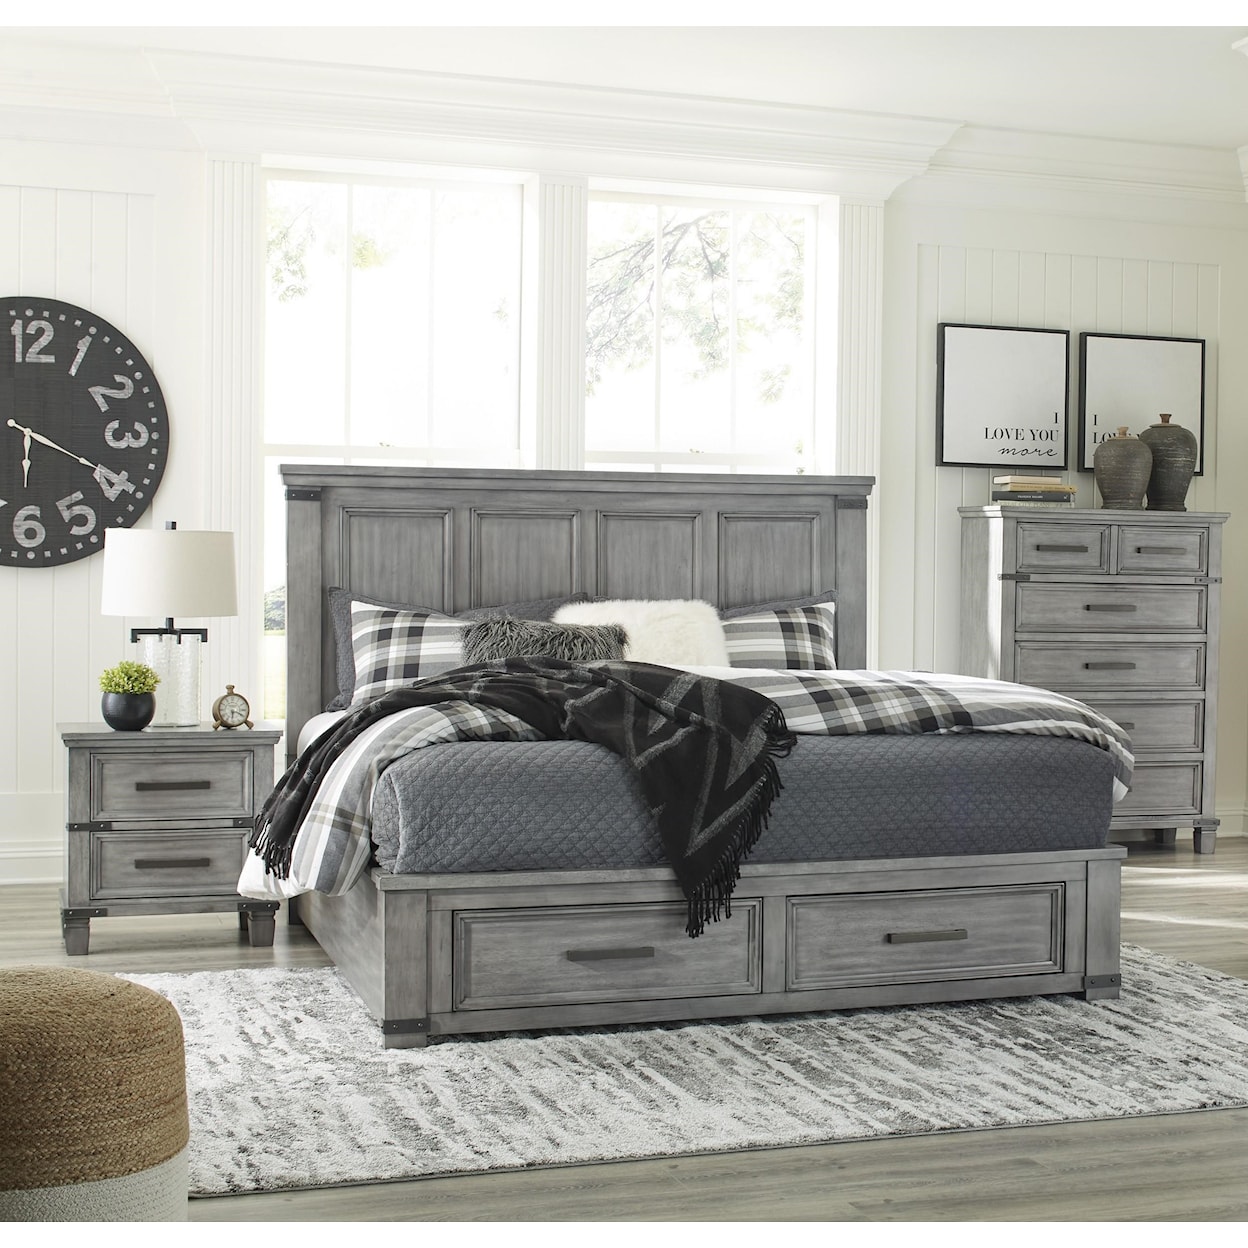 Signature Design by Ashley Russelyn 5 Piece King Bedroom Set